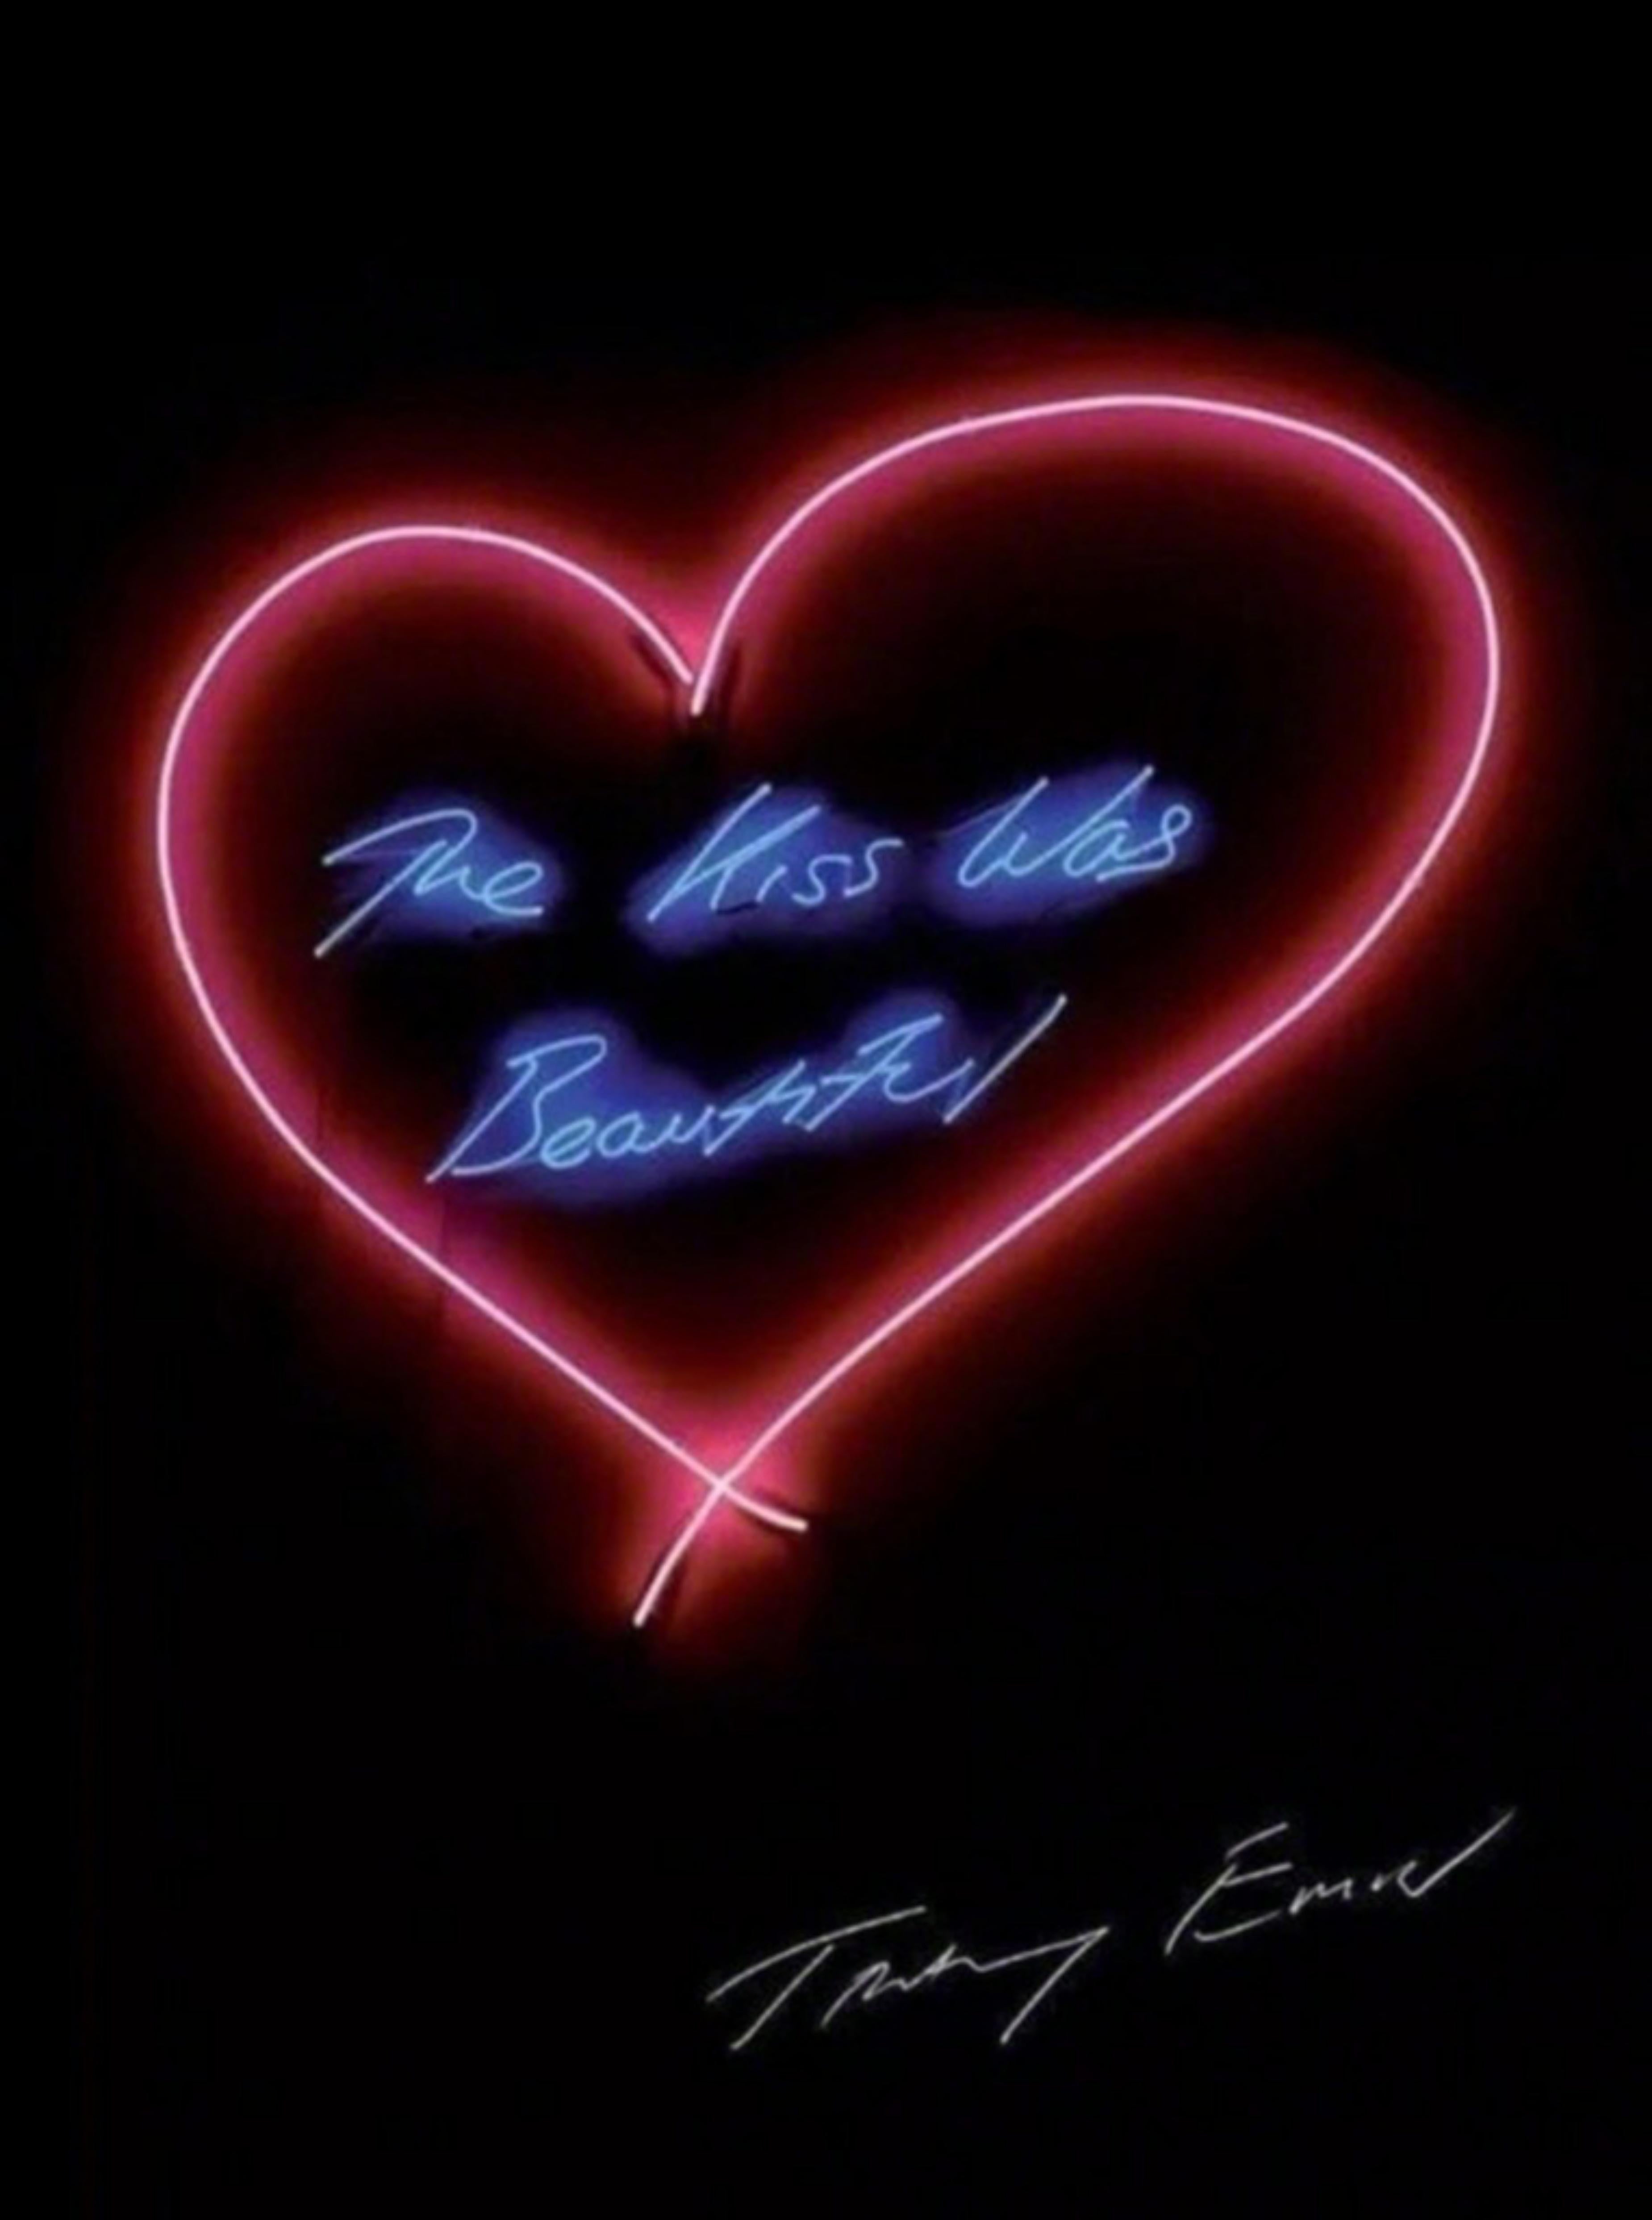 Tracey Emin Figurative Print - The Kiss Was Beautiful - gorgeous limited edition hand signed print by YBA star